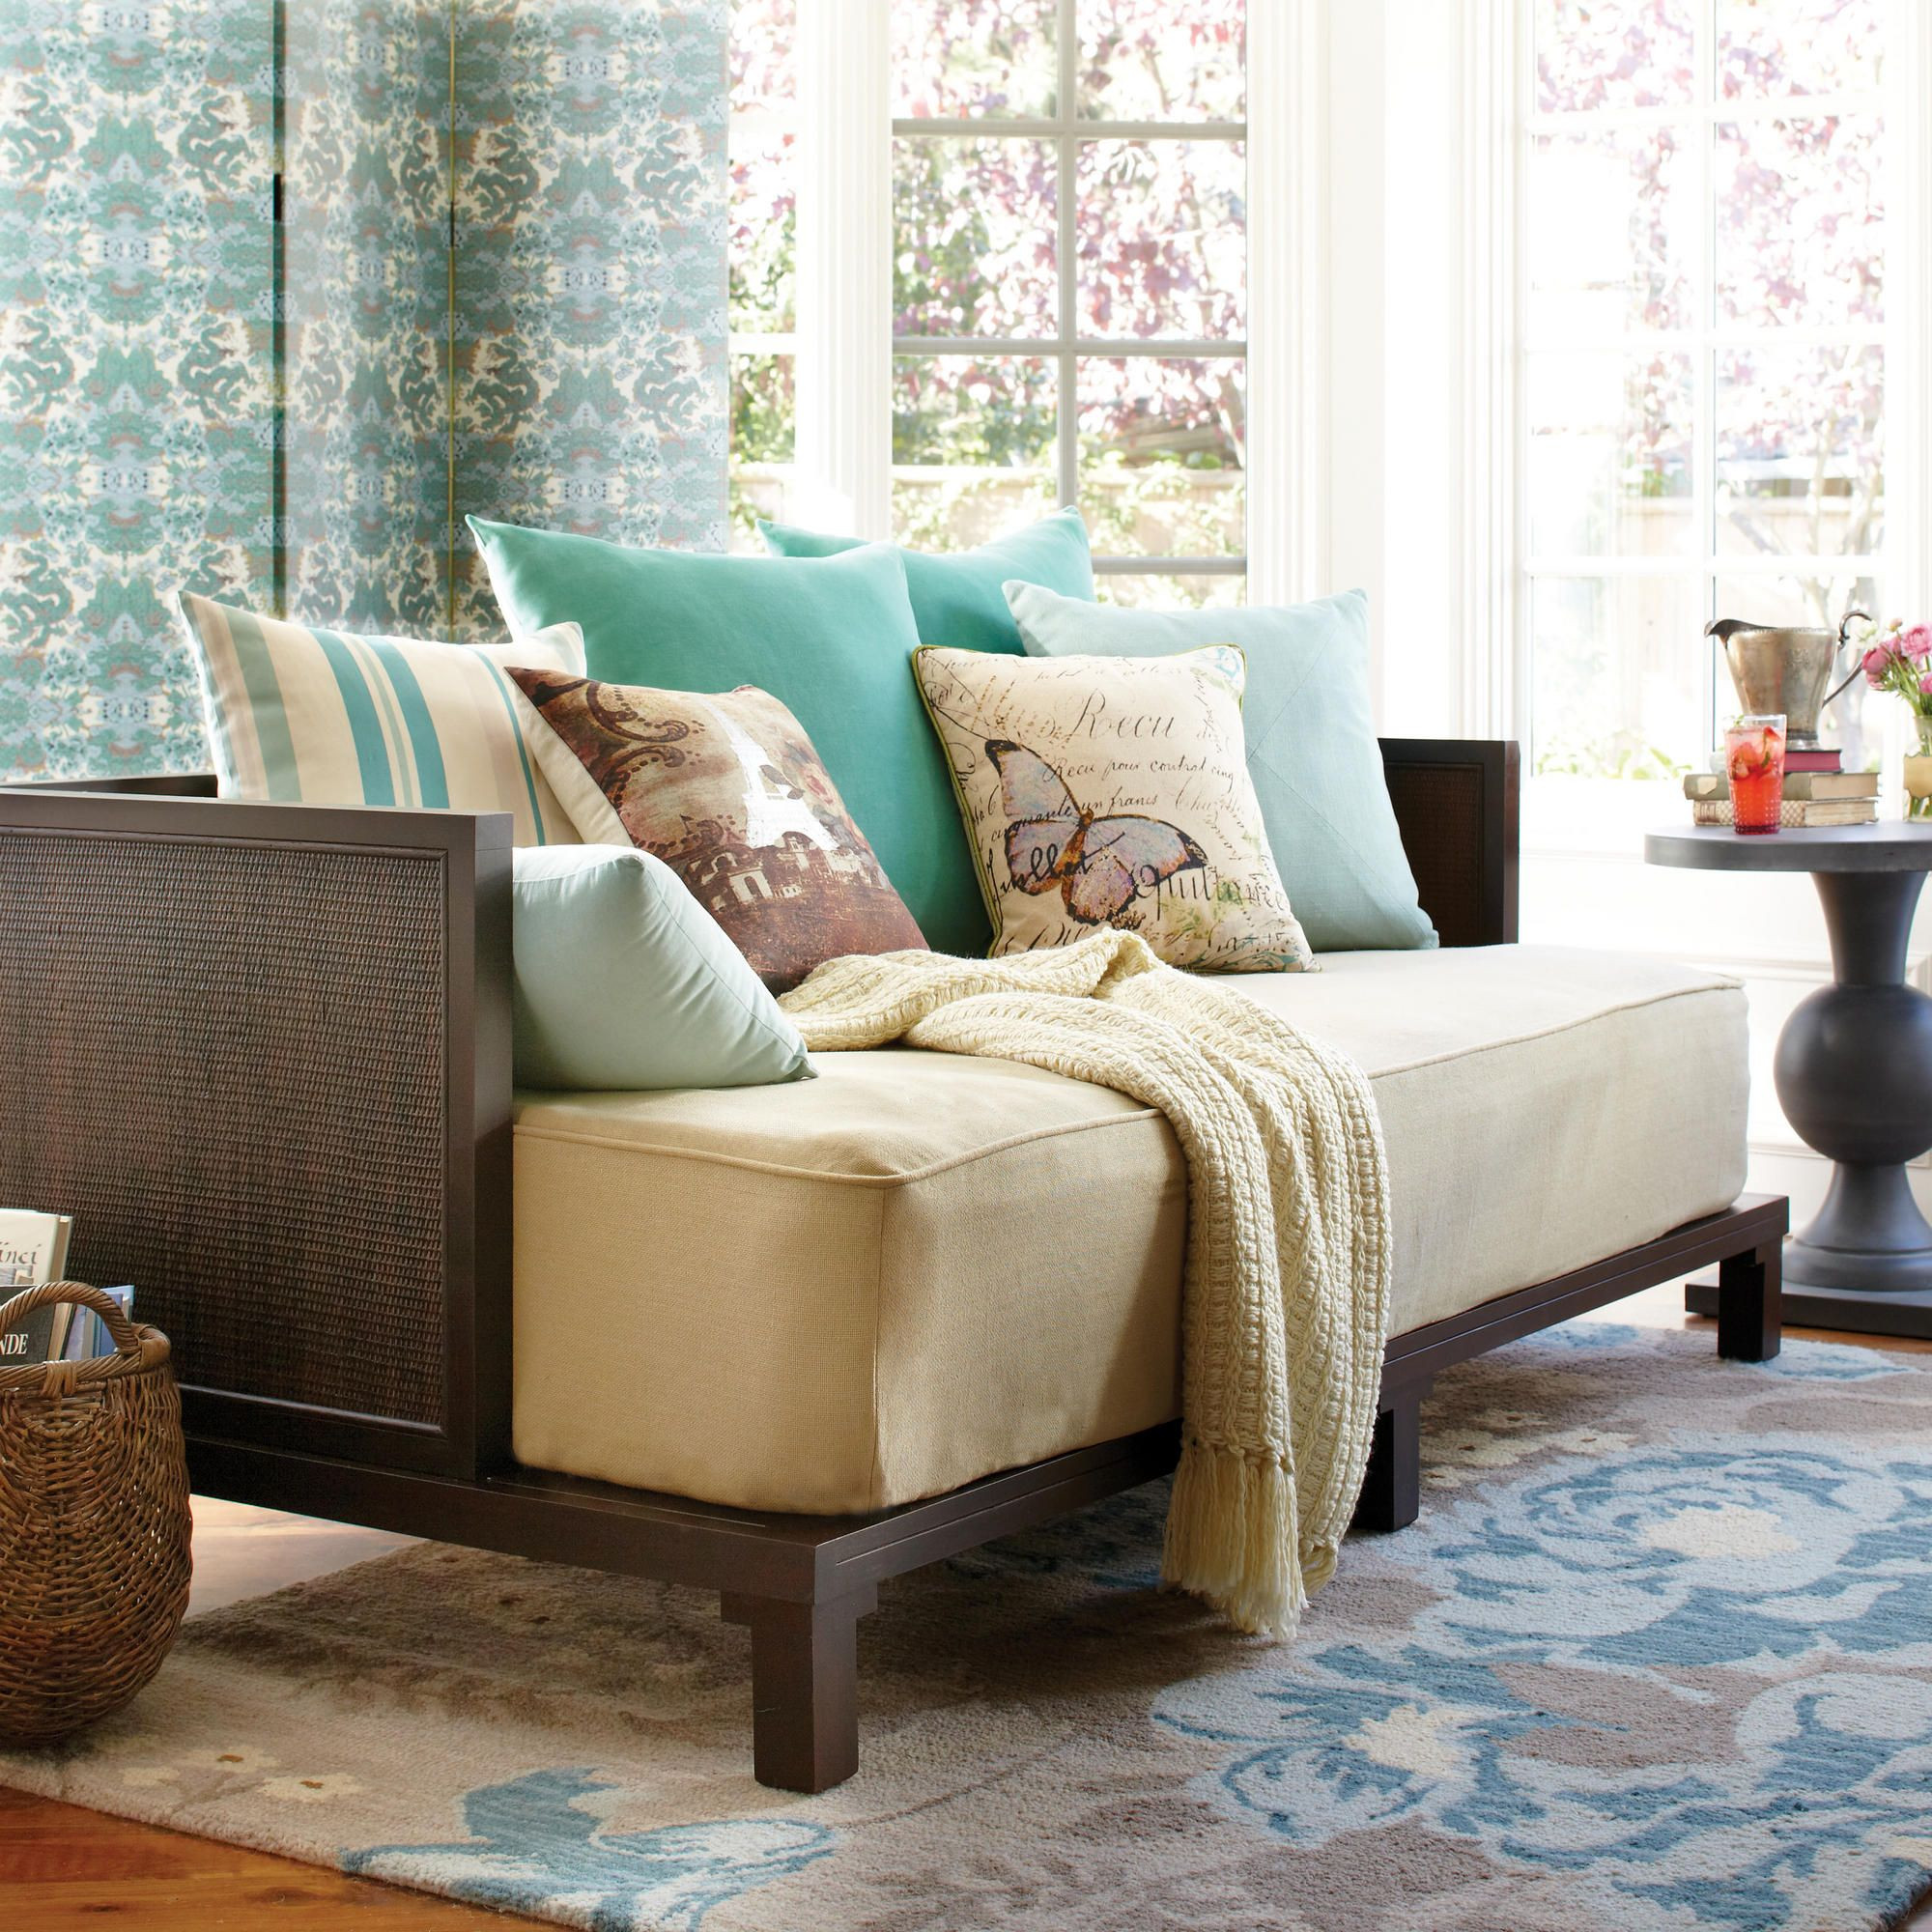 Daybed In Living Room Ideas
 This could be perfect on the 3rd floor for the extra